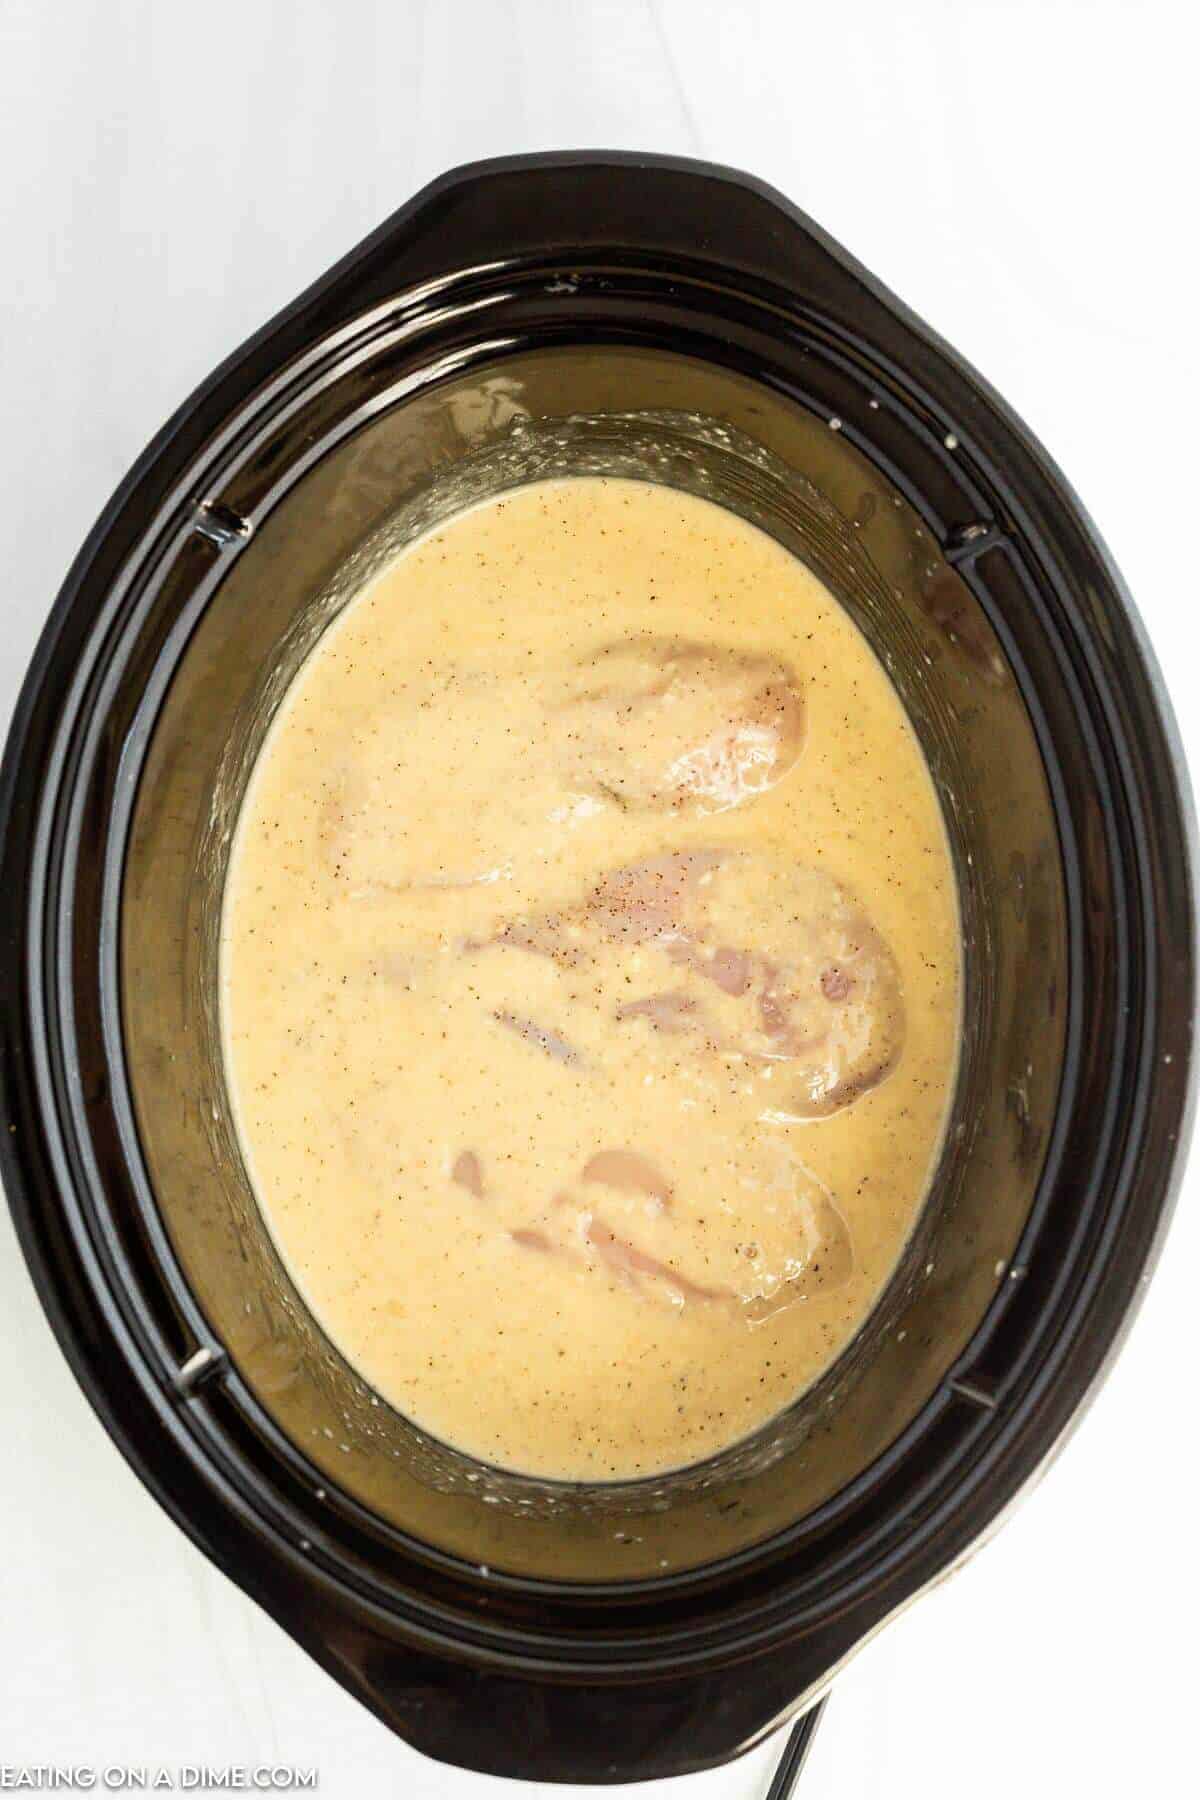 Adding the sauce and chicken to the slow cooker